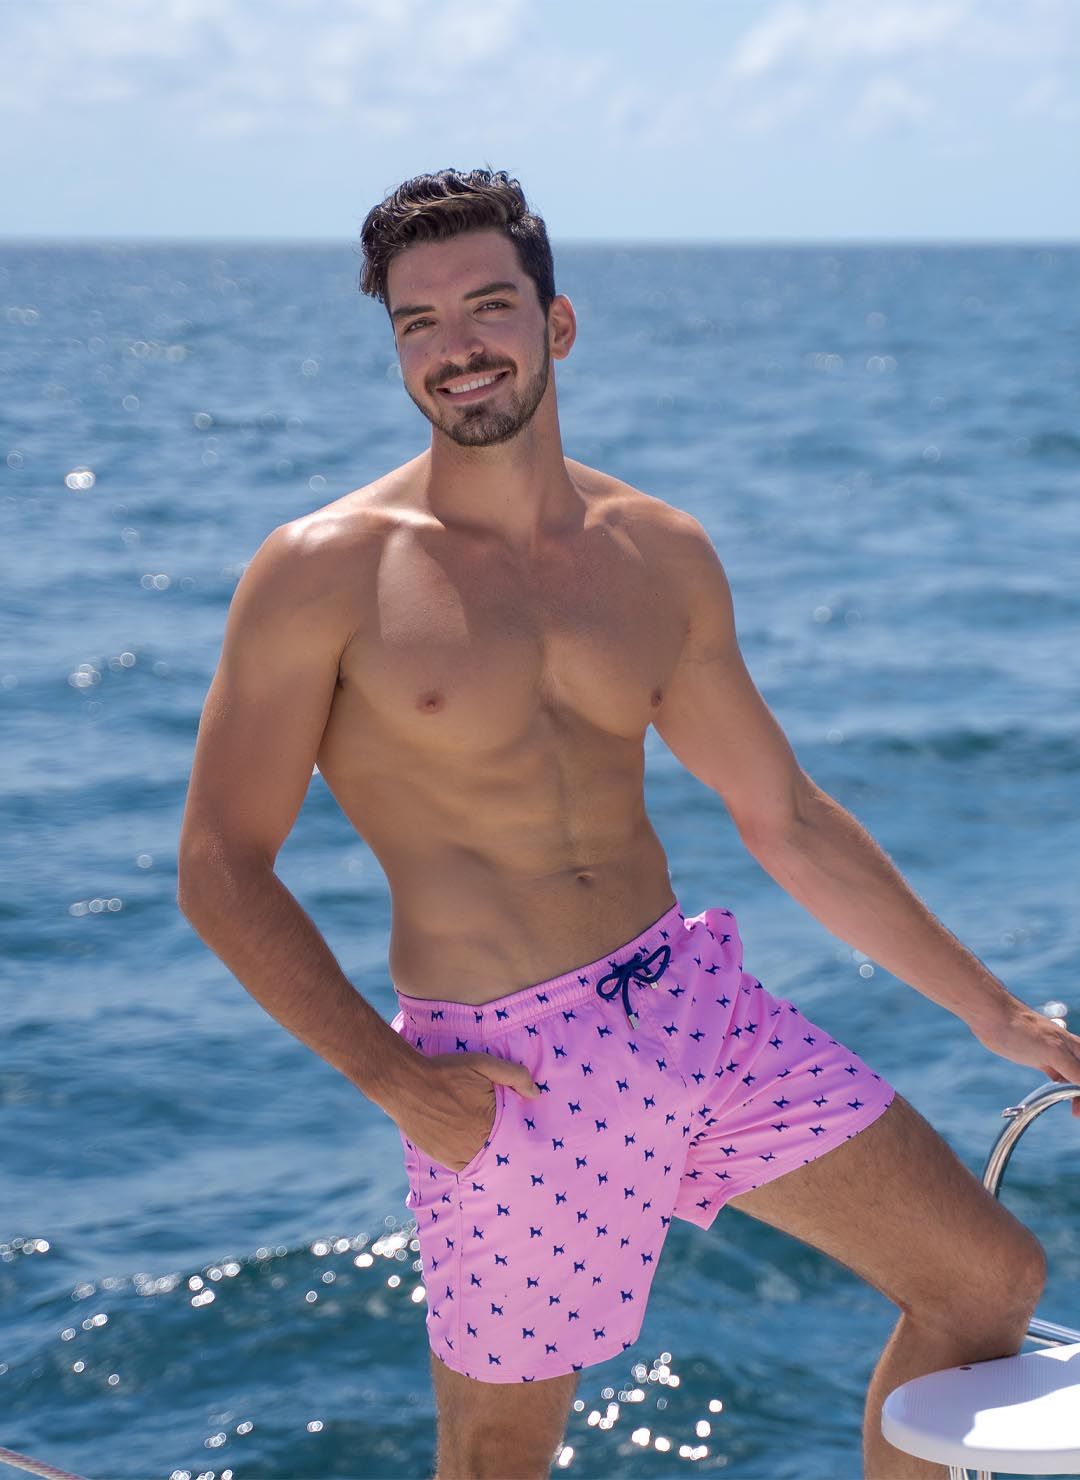 The Az are essential CAHA CAPO boardshorts in Archie Pink. Part of the CAHA CAPO men's swimwear collection.